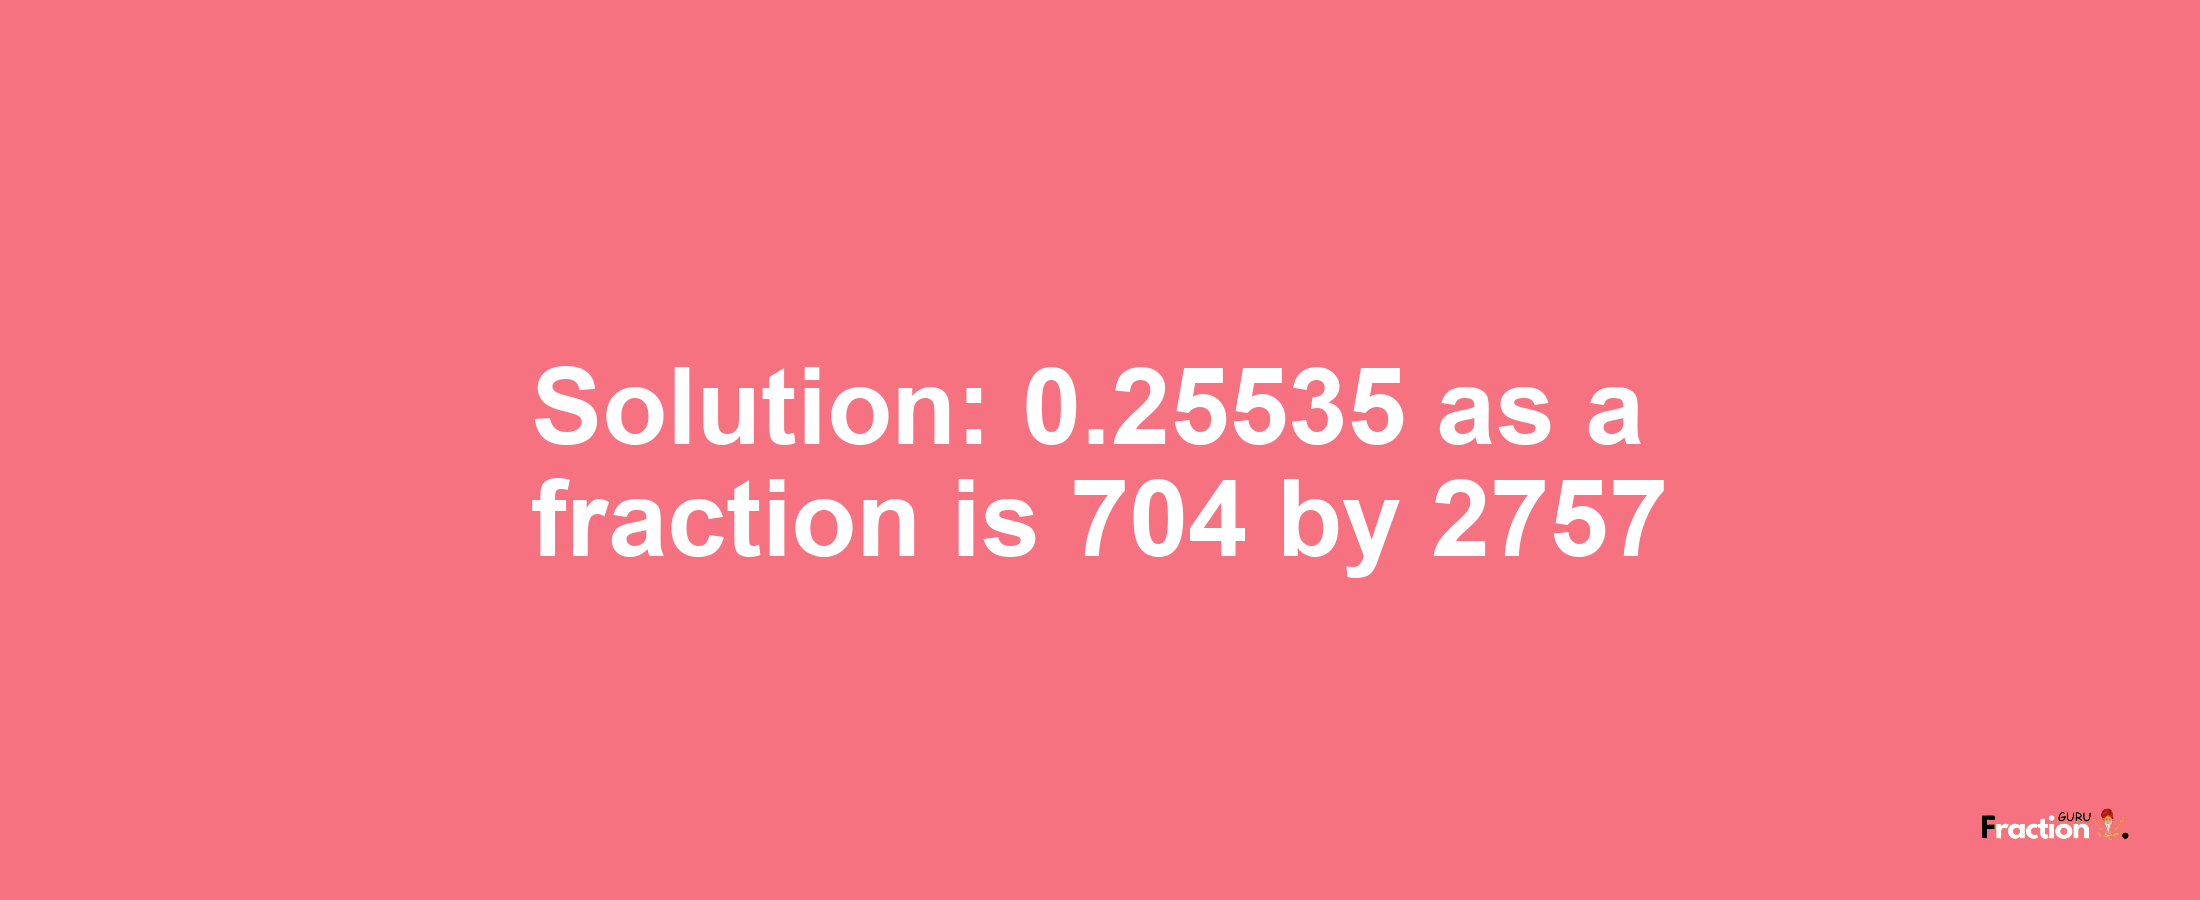 Solution:0.25535 as a fraction is 704/2757